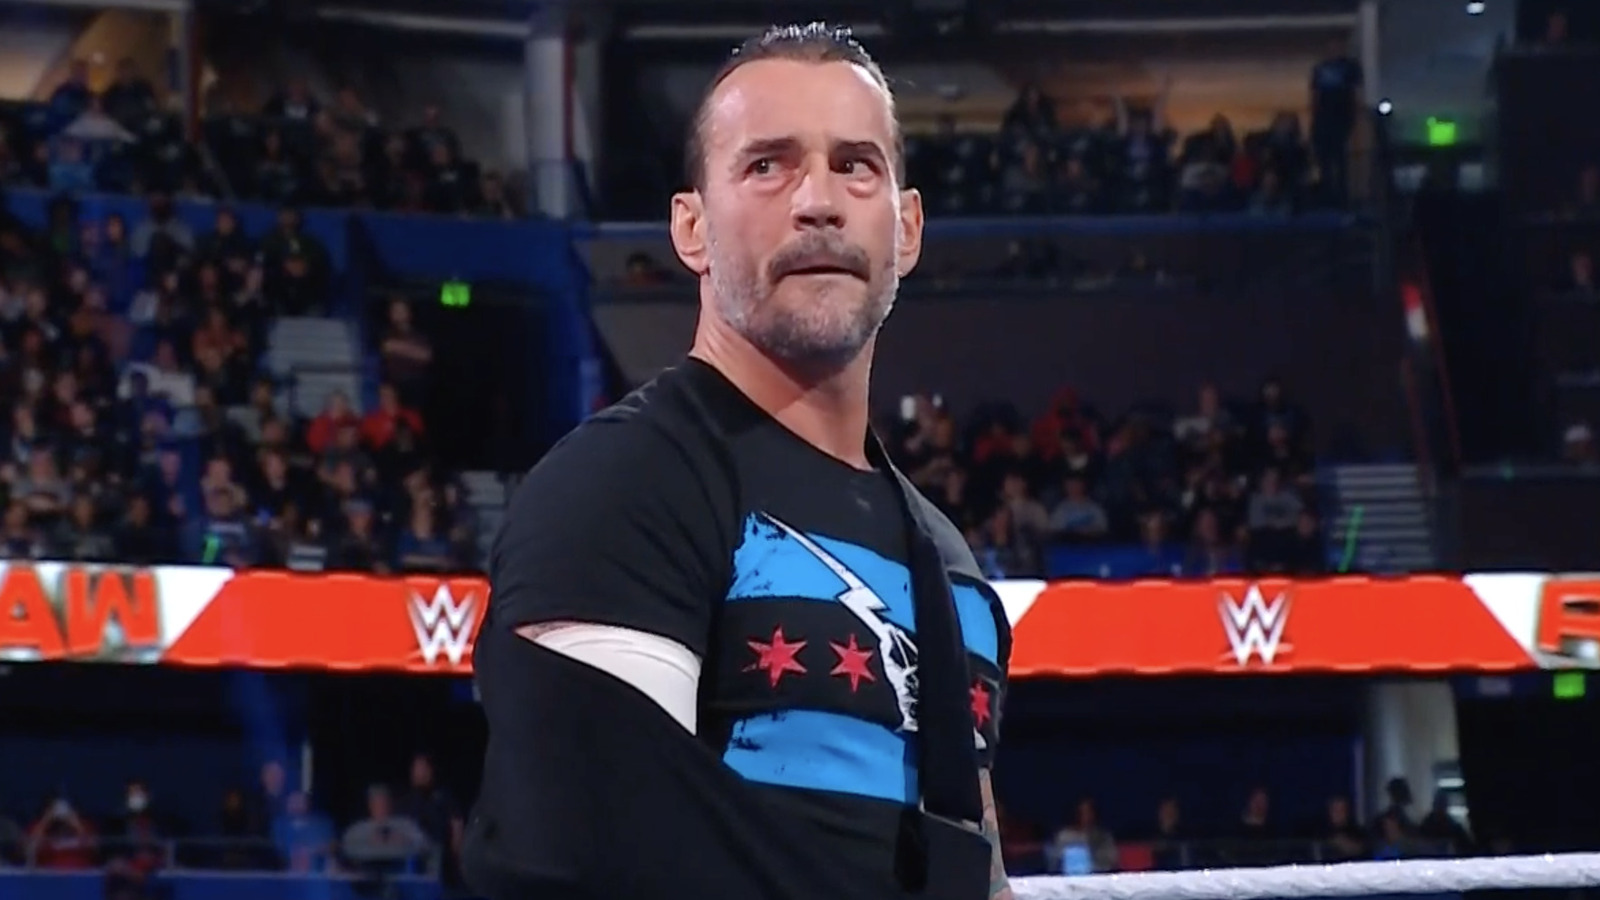 Eric Bischoff Reacts To News Of CM Punk's WWE Royal Rumble Injury